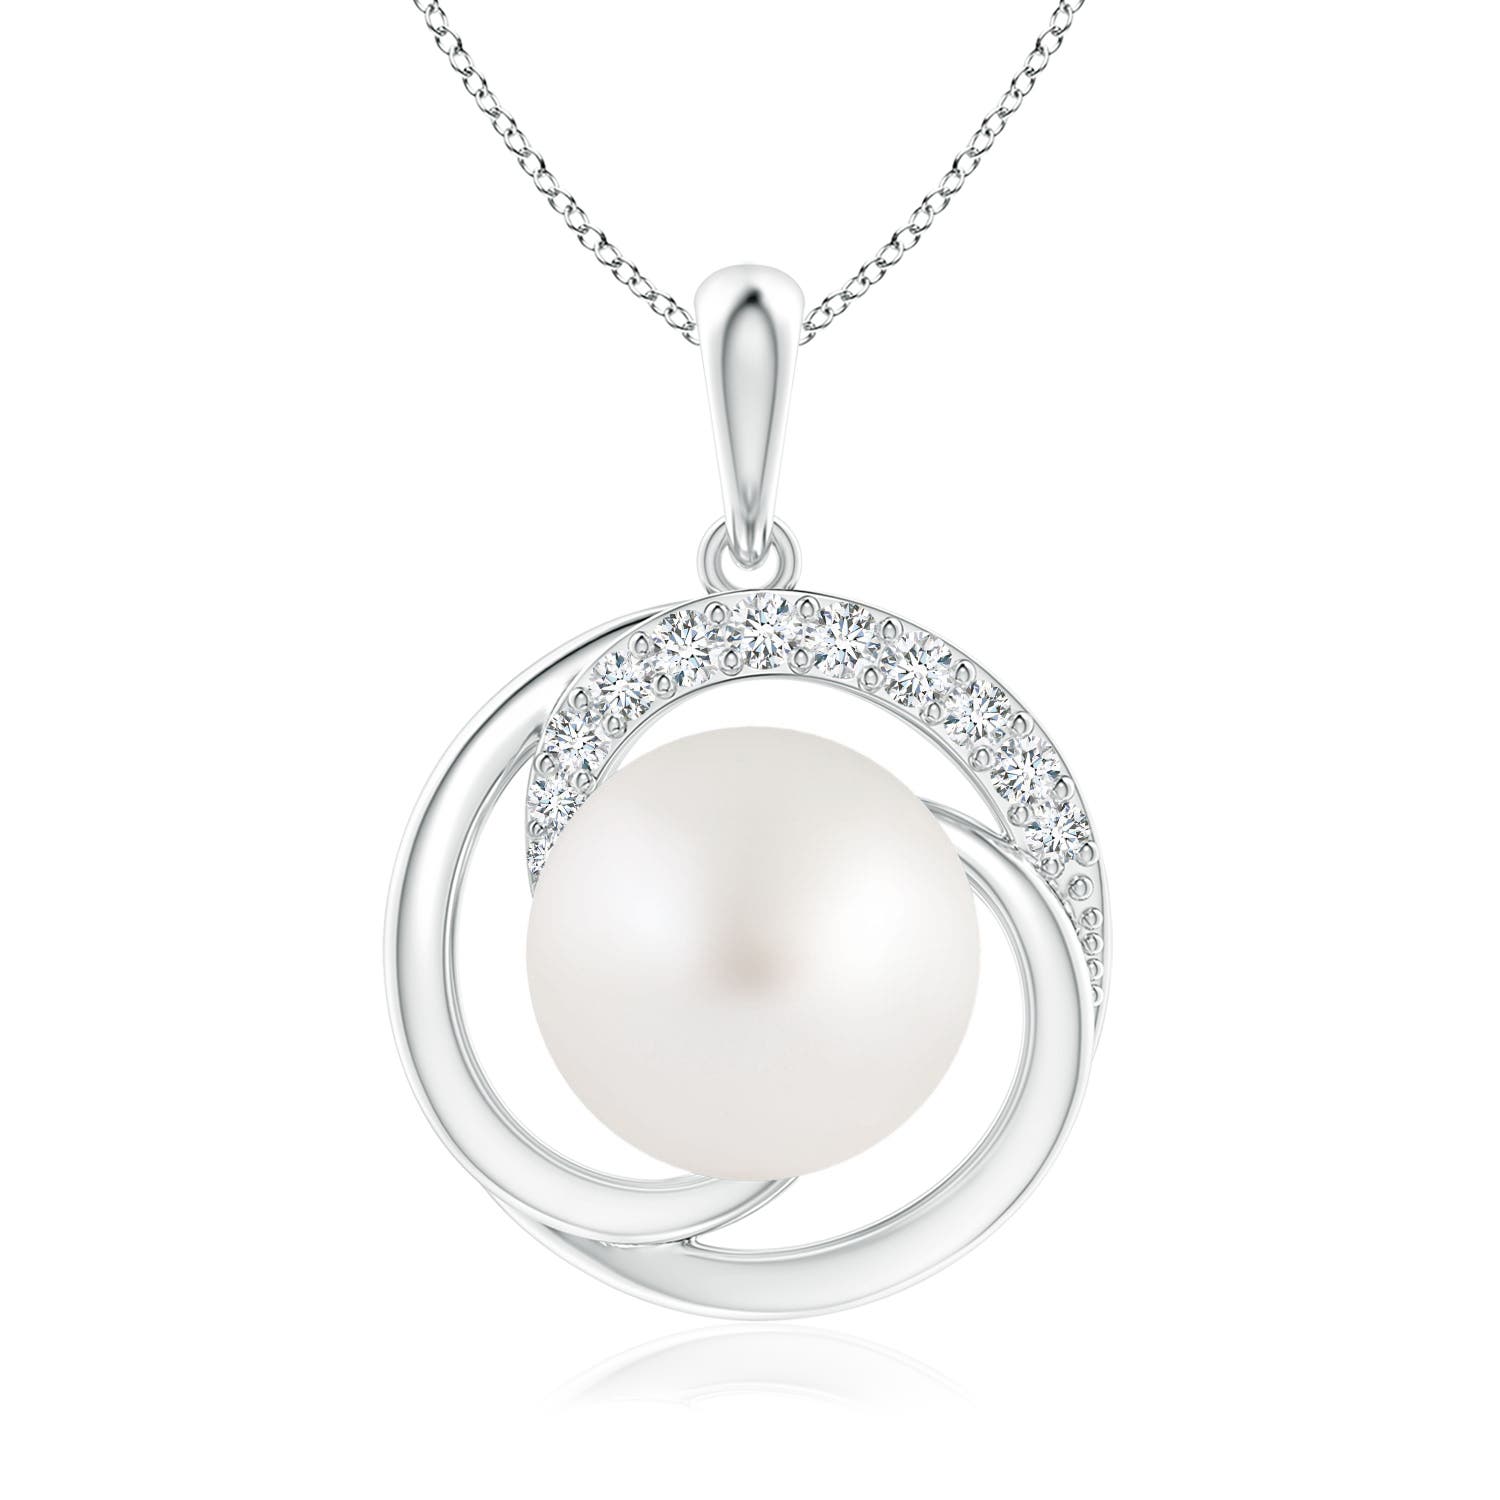 AA - South Sea Cultured Pearl / 7.33 CT / 14 KT White Gold